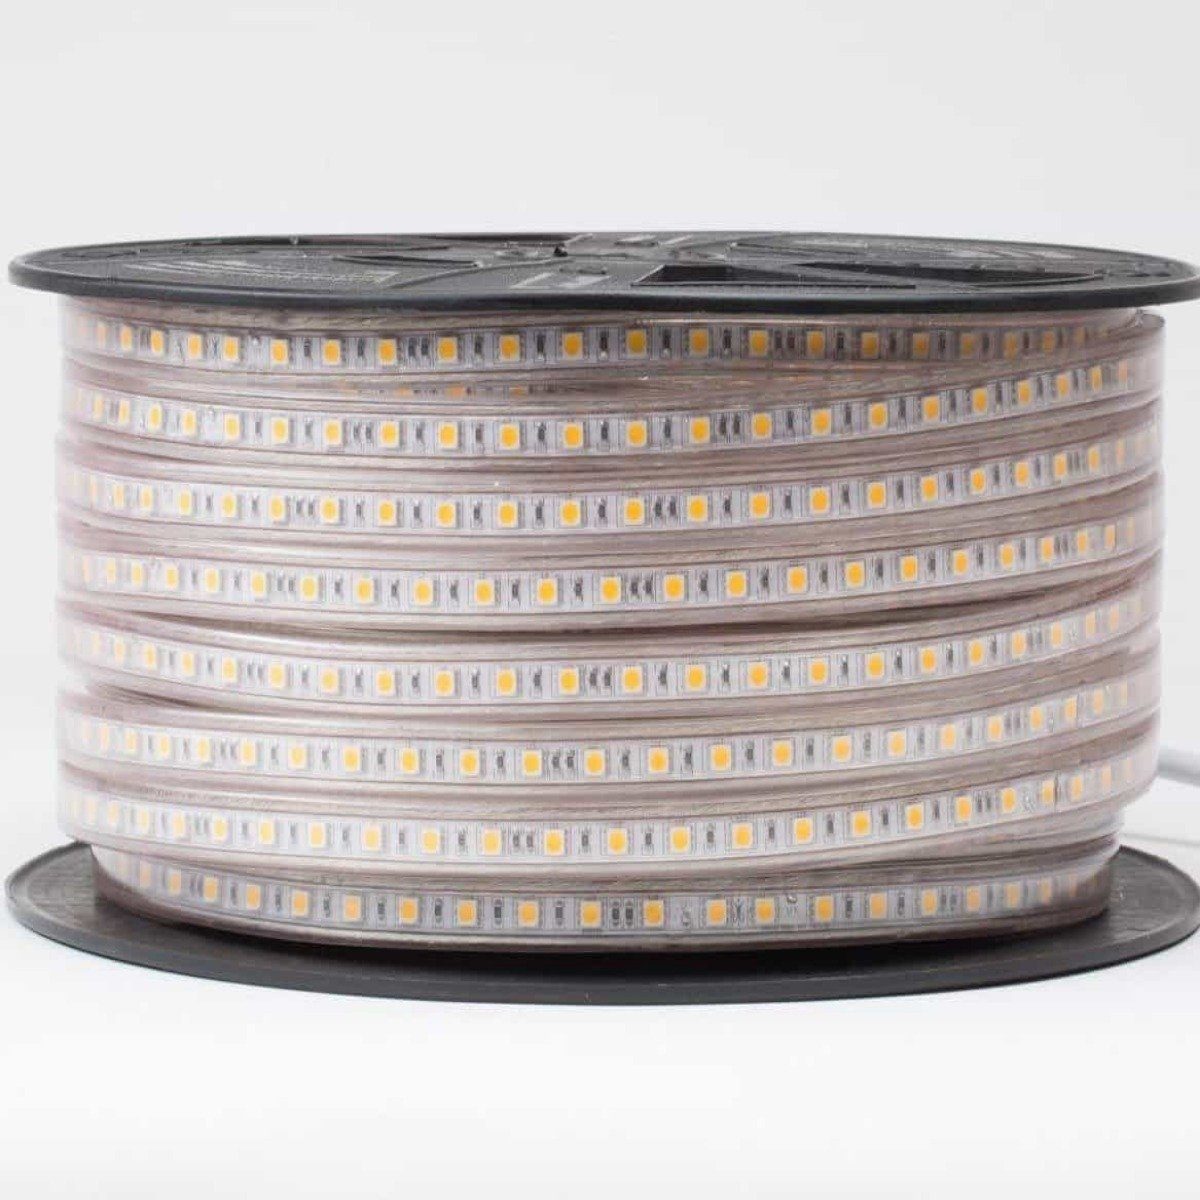 Load image into Gallery viewer, led strip light with visible yellow led chips wound tightly on black reel
